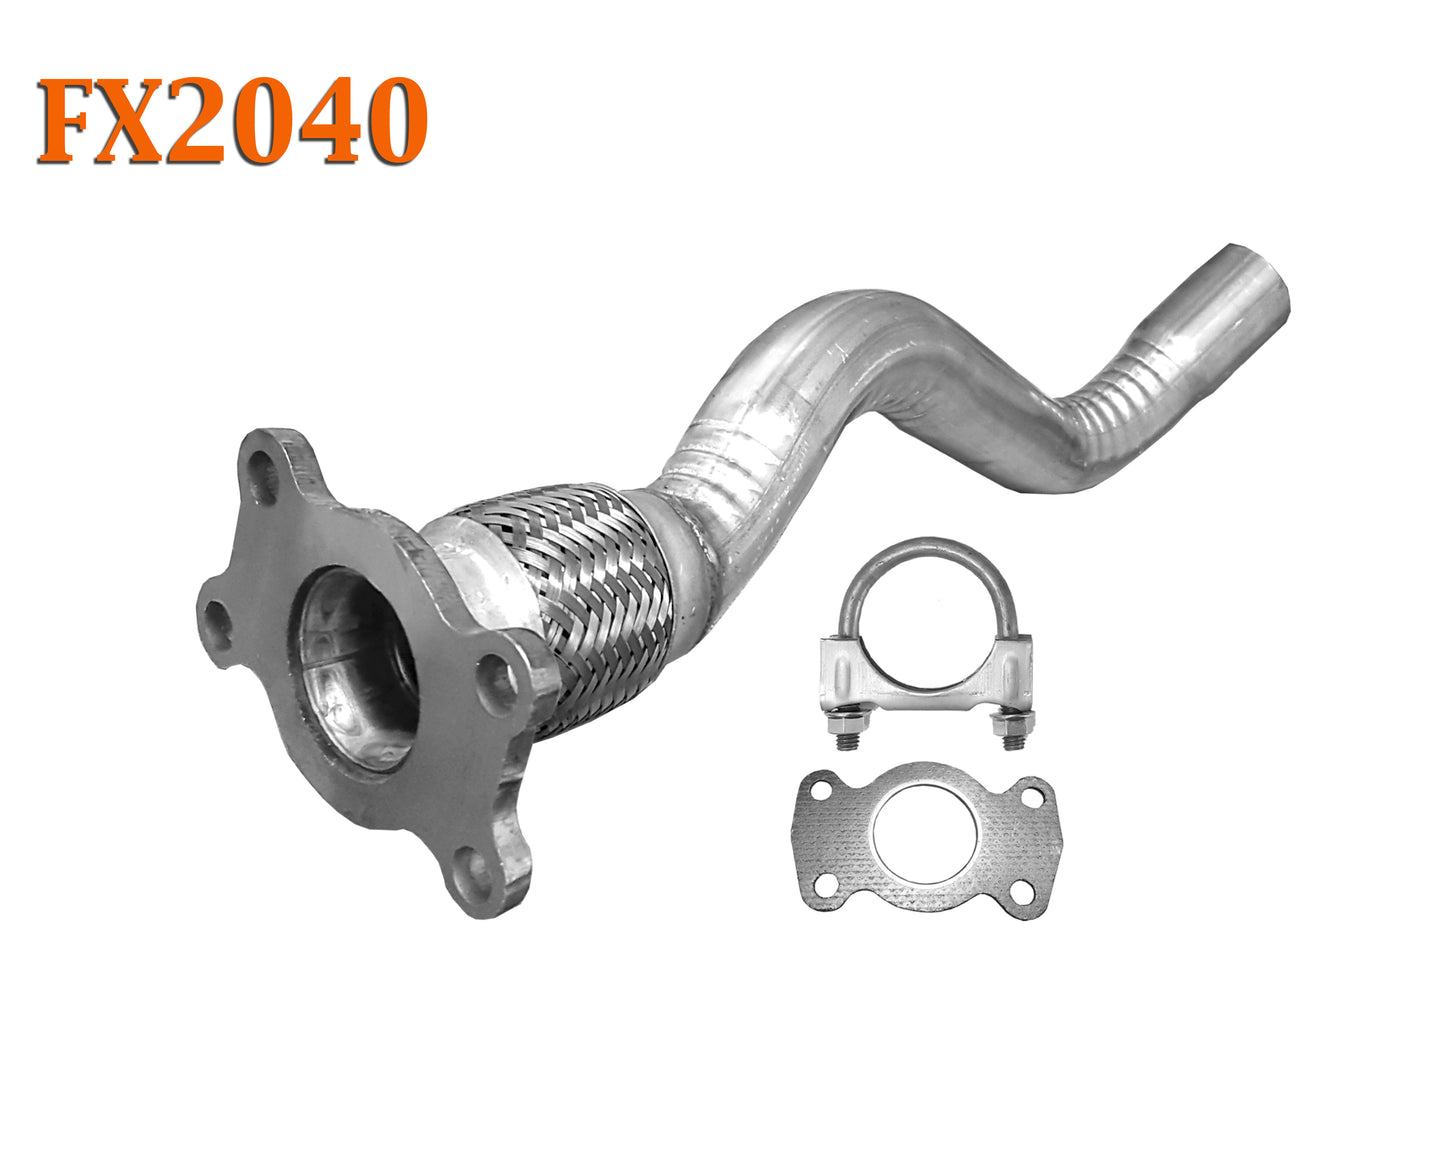 FX2040 Semi Direct Fit Exhaust Flange Repair Flex Pipe Replacement Kit With Gasket